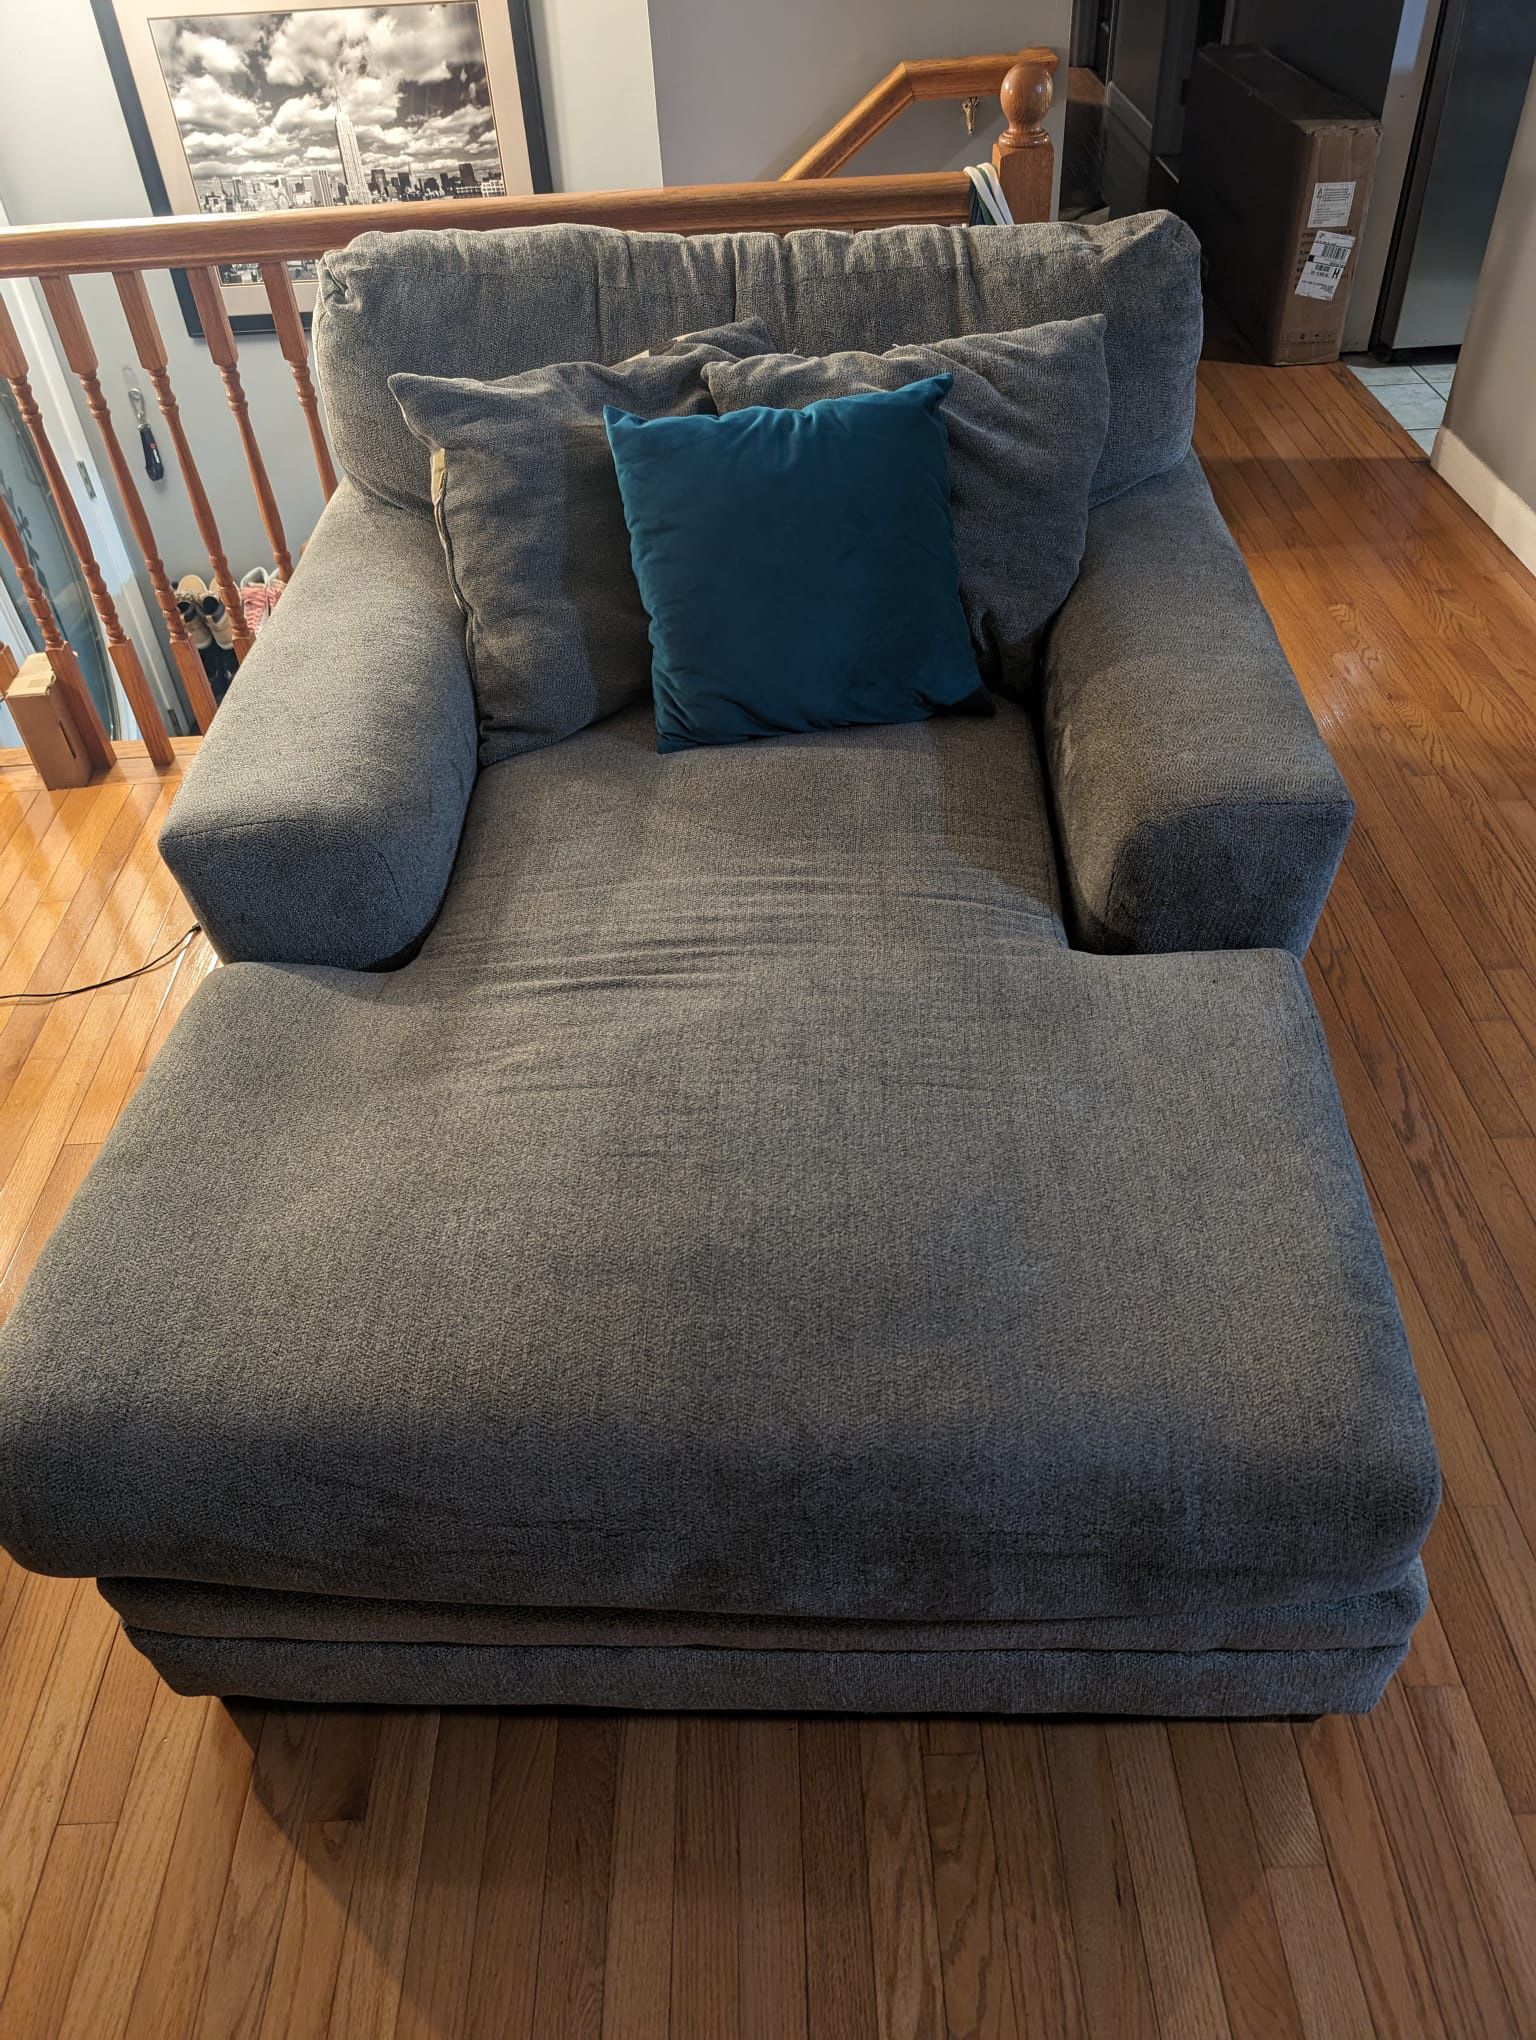 FREE 3 Couch Set